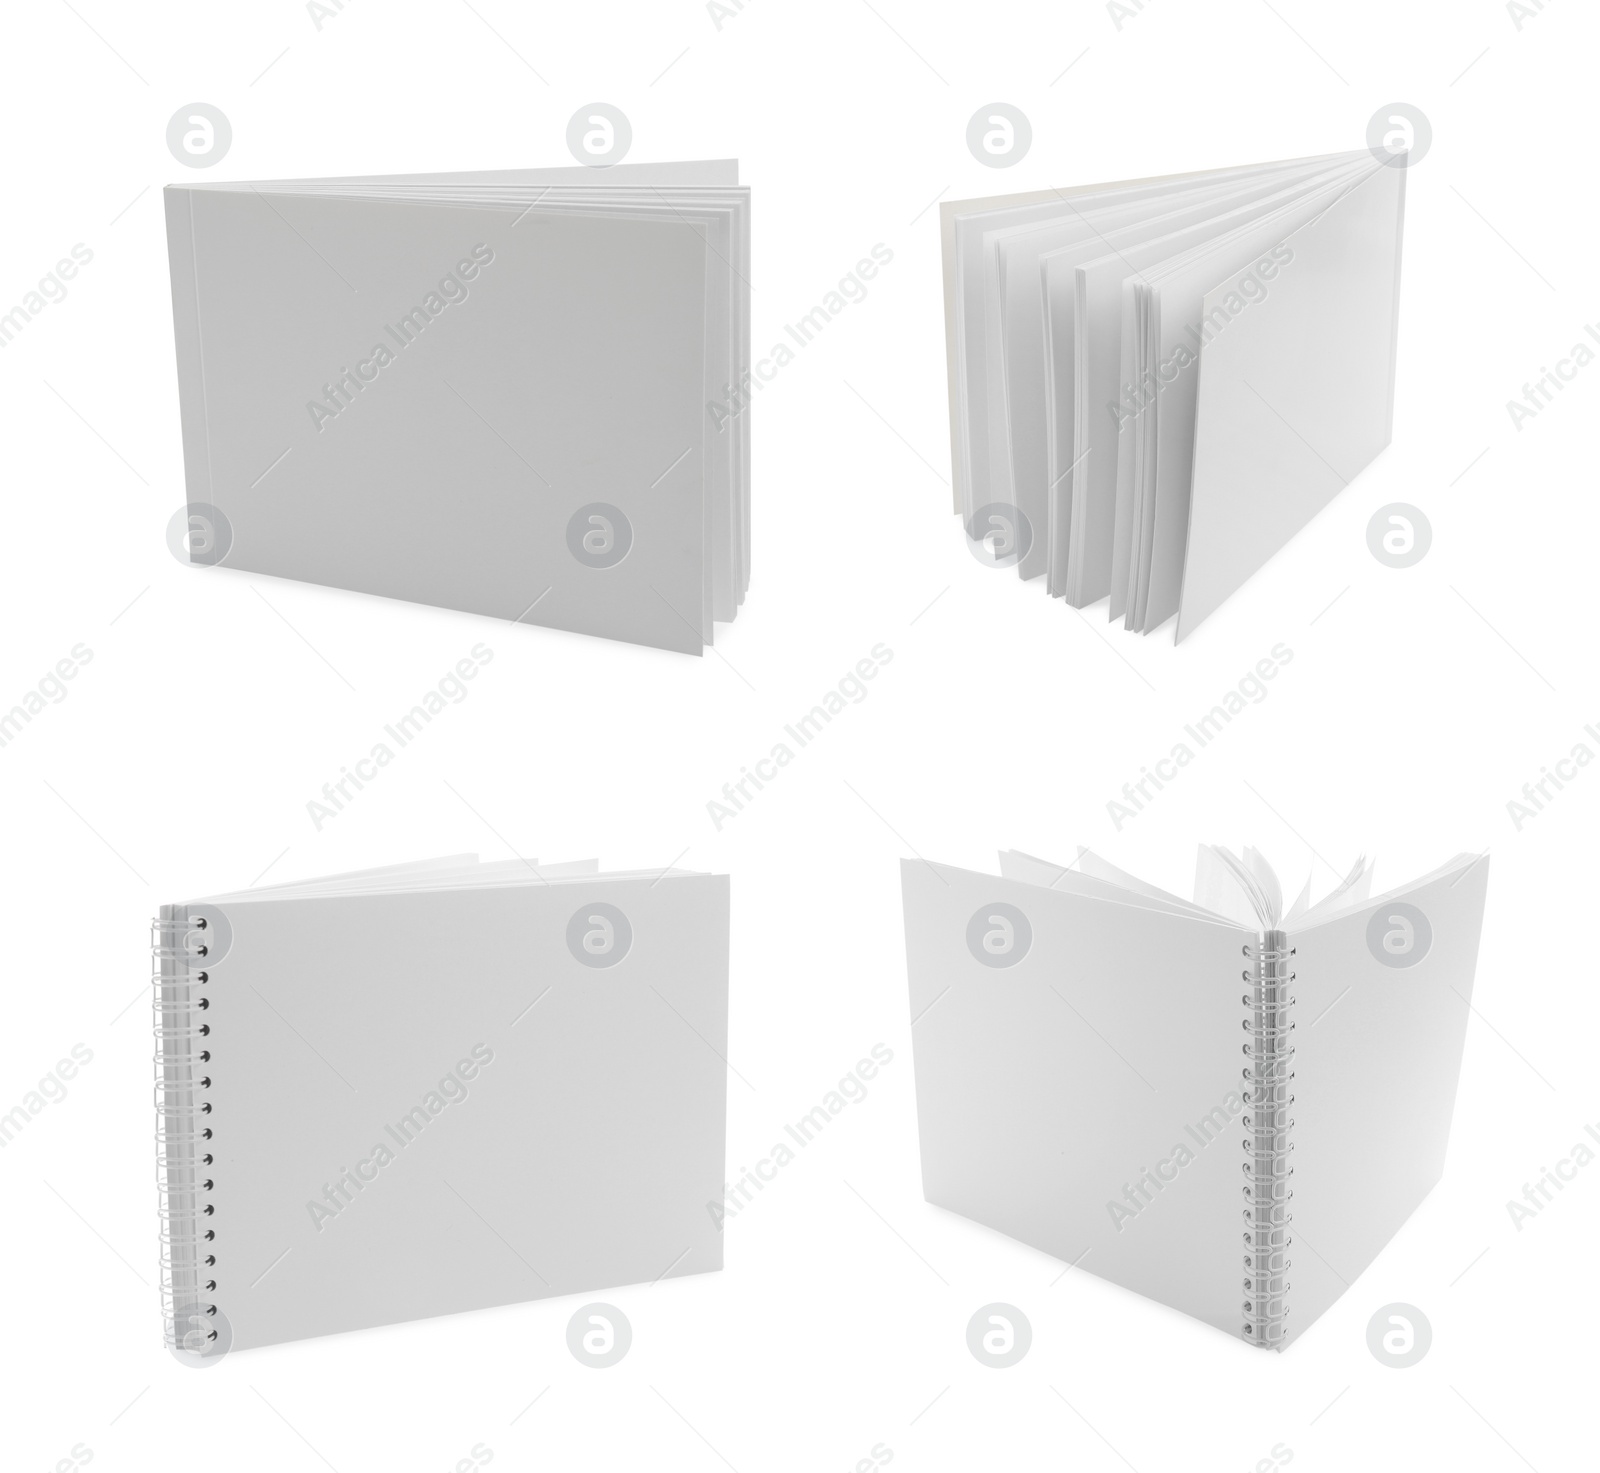 Image of Set with blank paper brochures on white background. Mockup for design